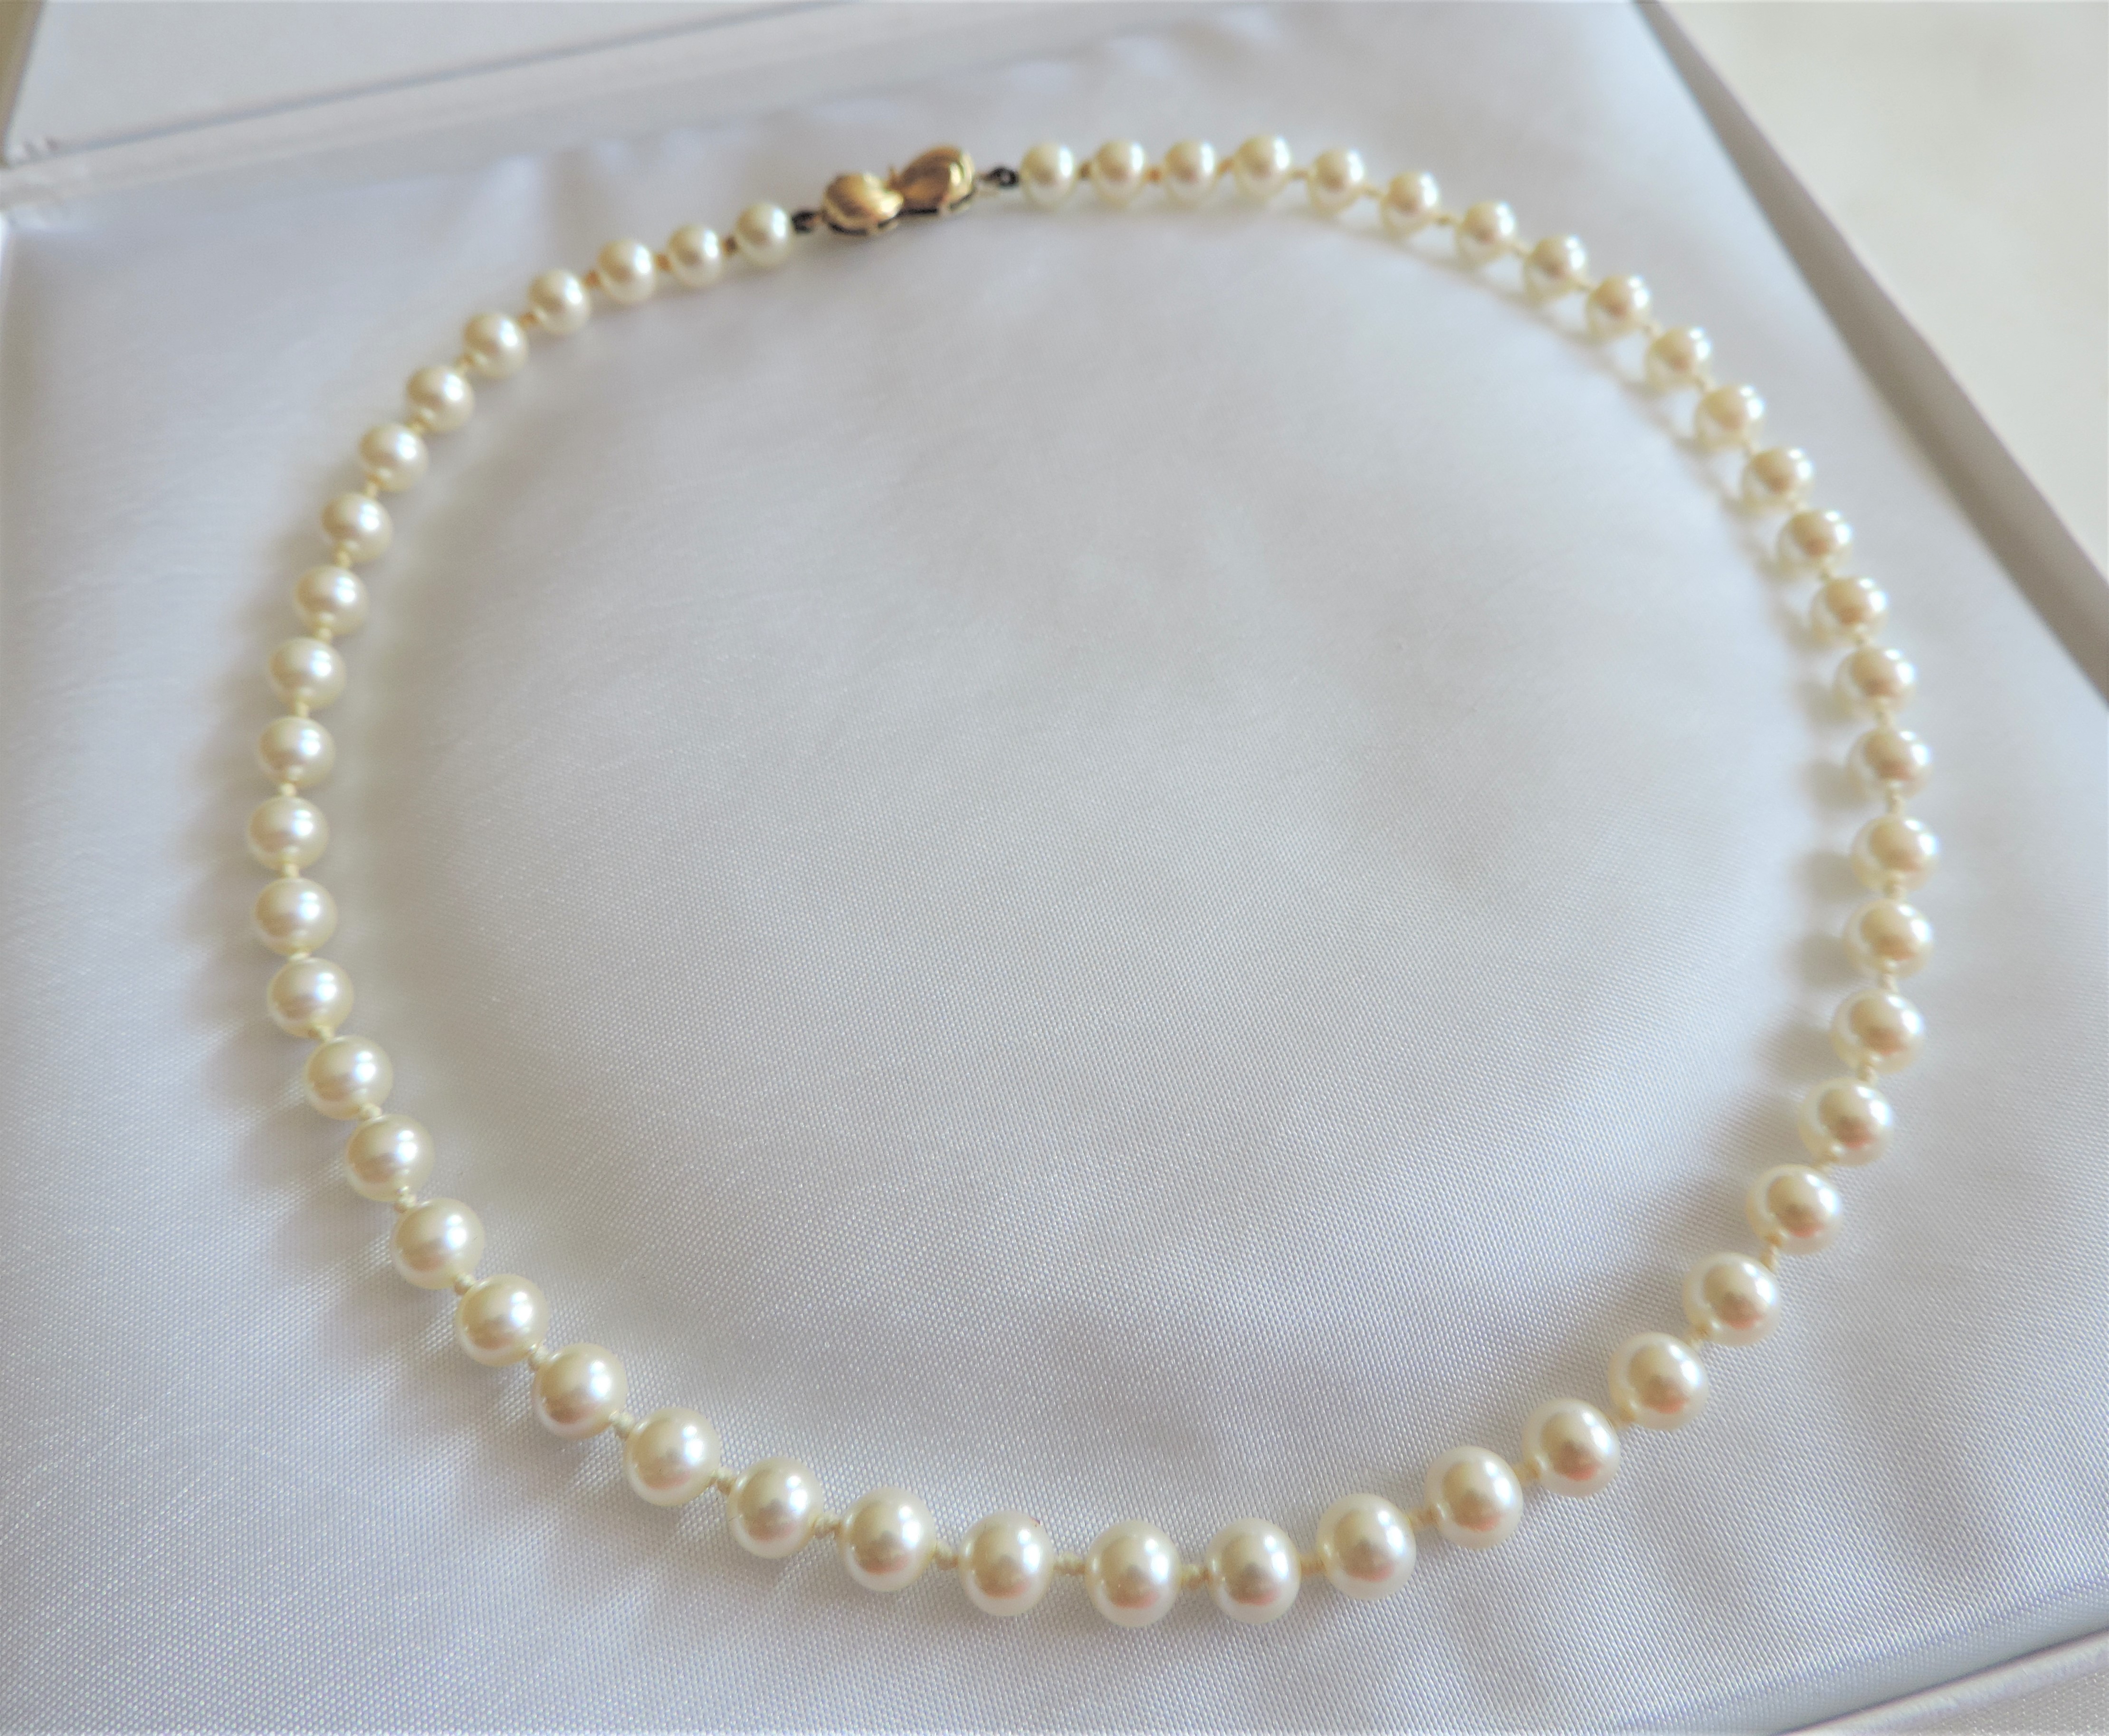 Vintage Pearl Necklace - Image 2 of 4